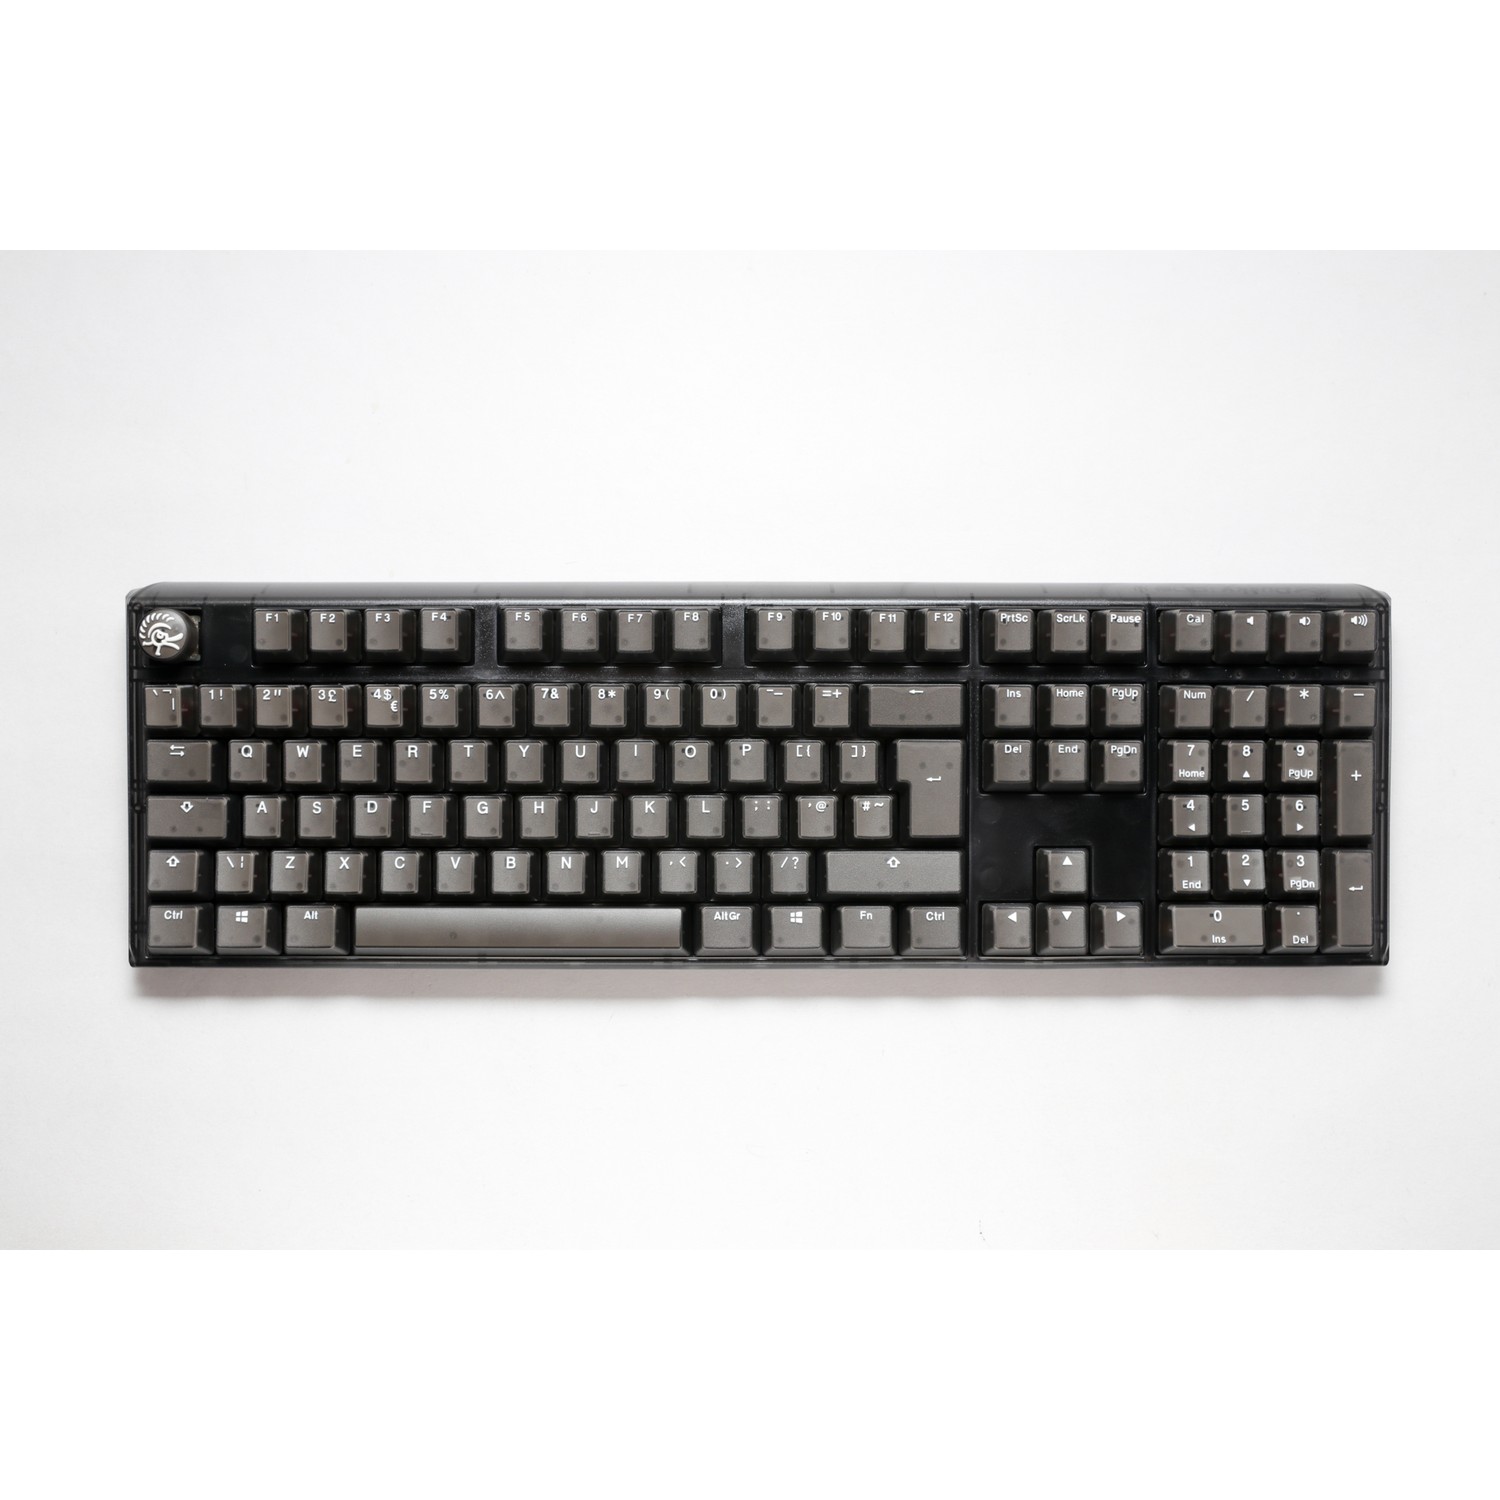 Ducky - Ducky One 3 Aura Mechanical Gaming Keyboard Black Cherry Brown Switch UK Layout